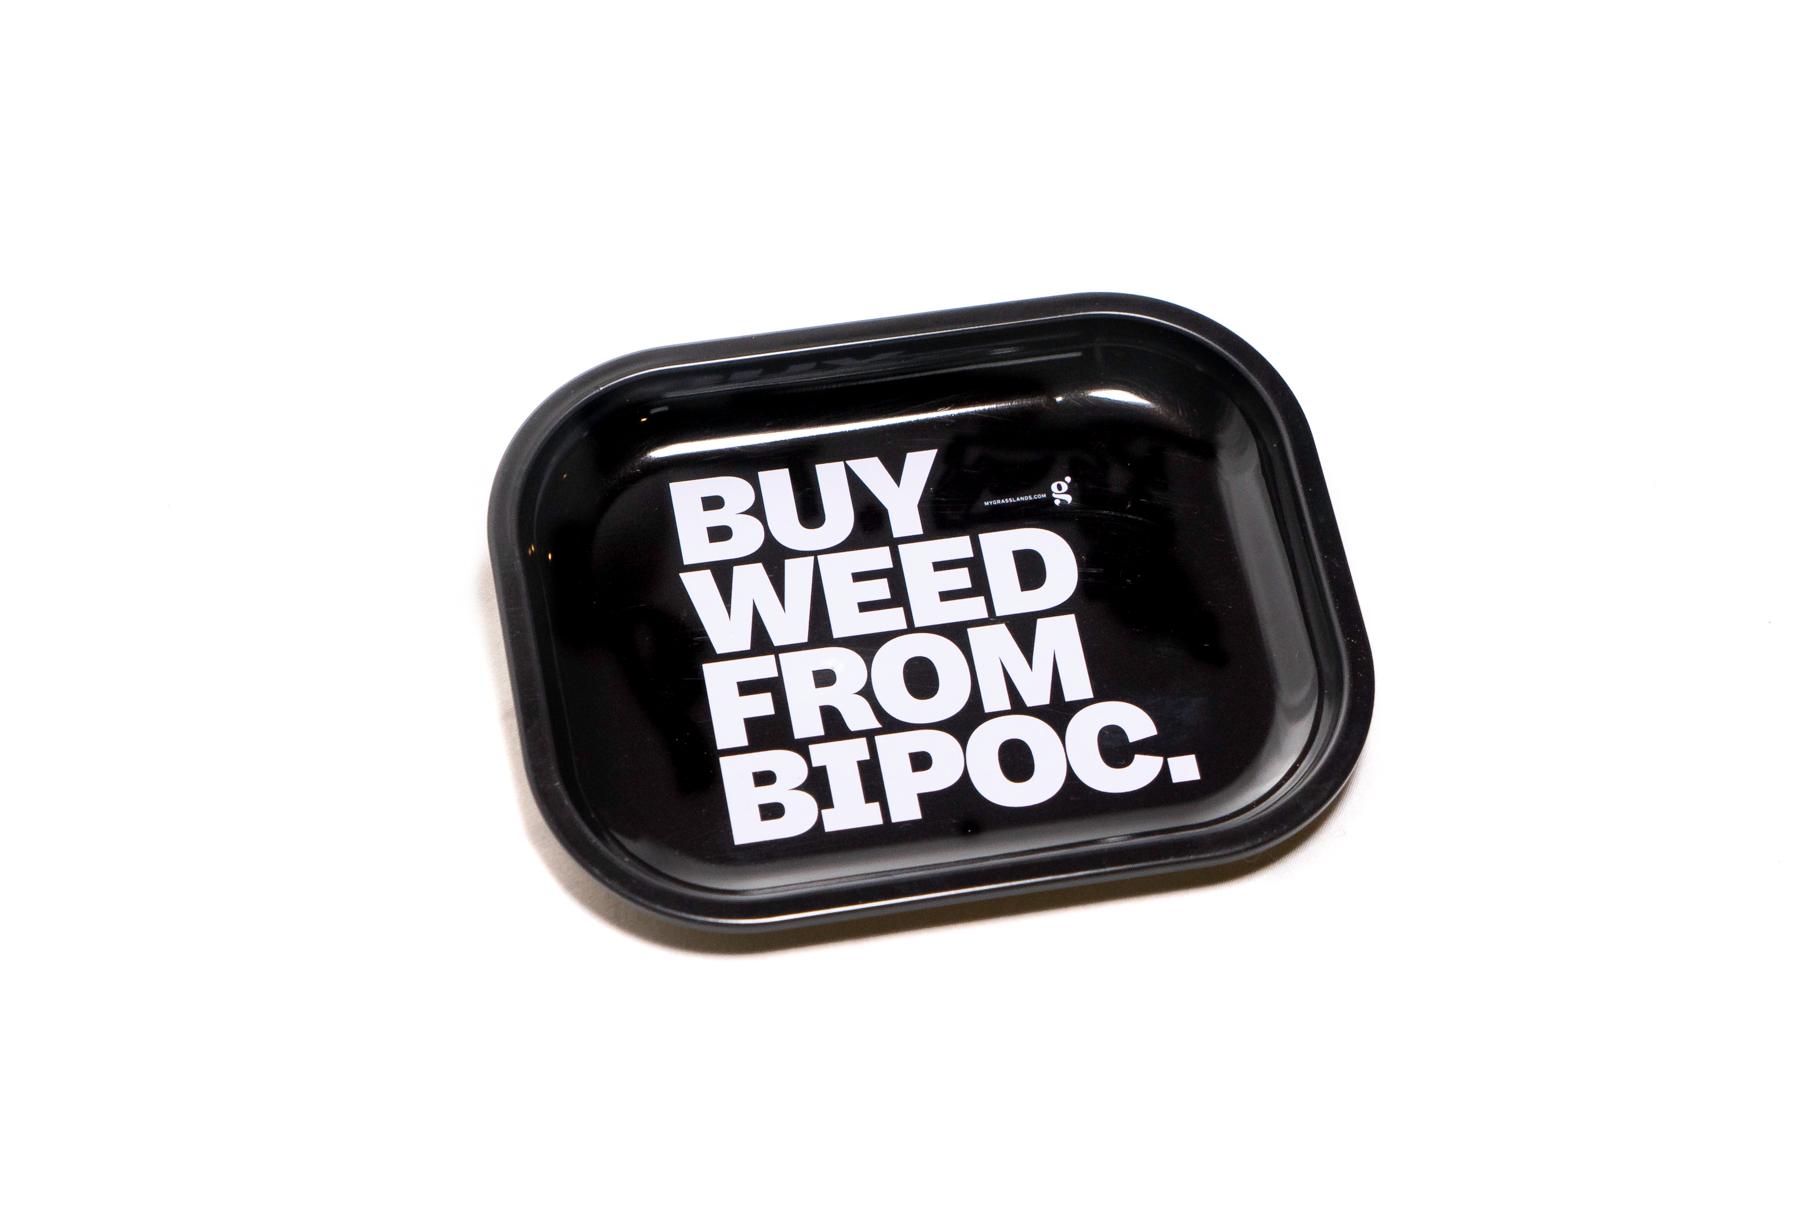 Product: Rolling Tray: Buy Weed From Bipoc